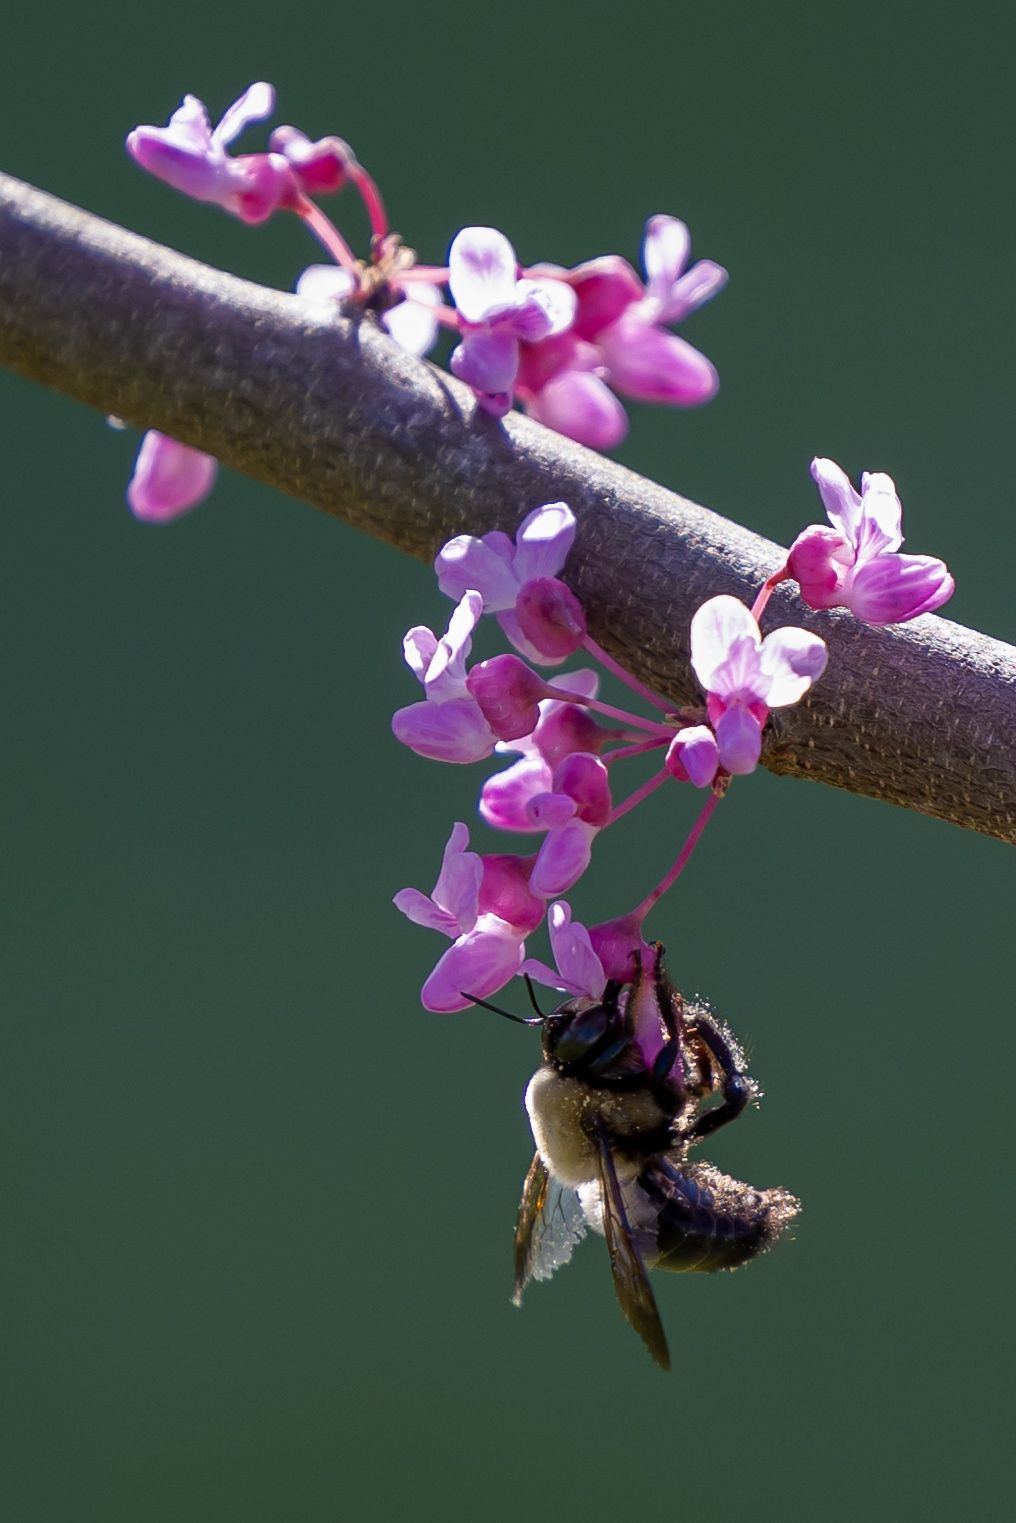 Bee hanging off a branch with pink flowers